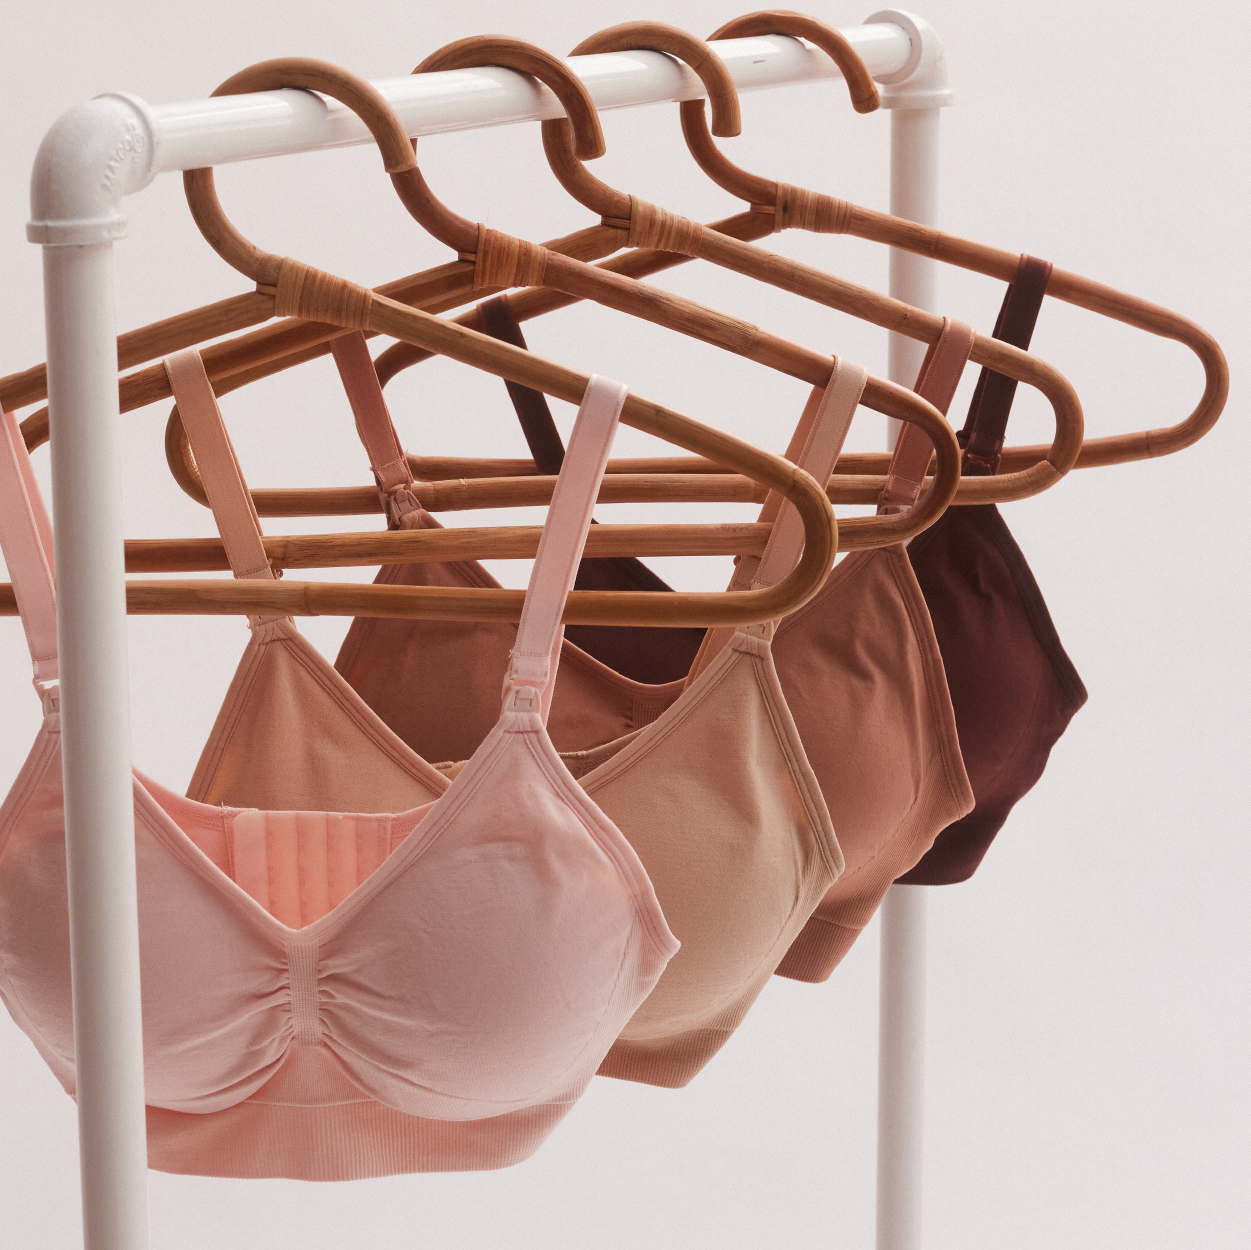 The 8 Best Maternity Bras & Nursing Bras You'll Need on Your